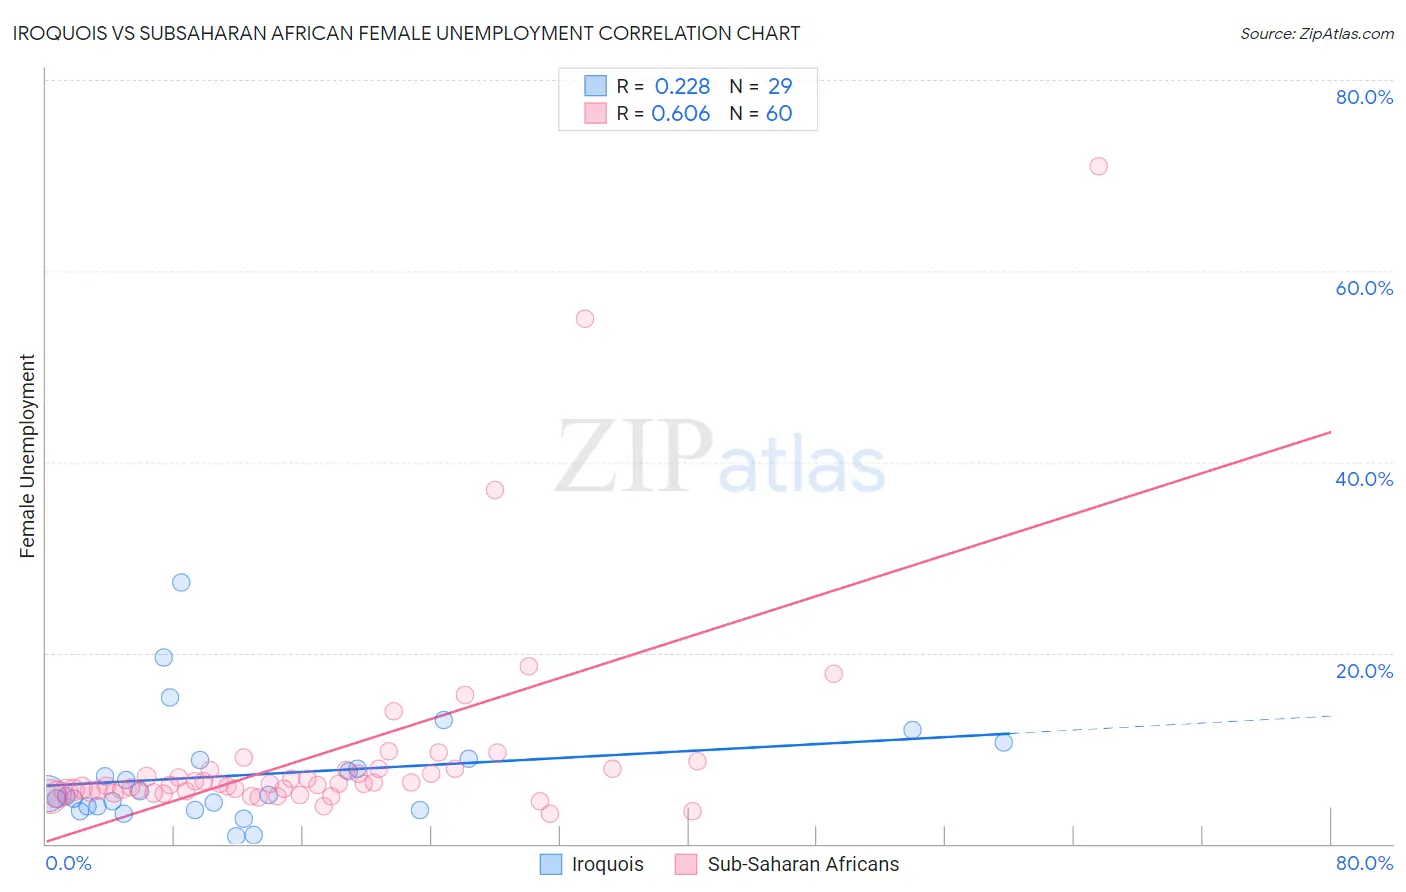 Iroquois vs Subsaharan African Female Unemployment